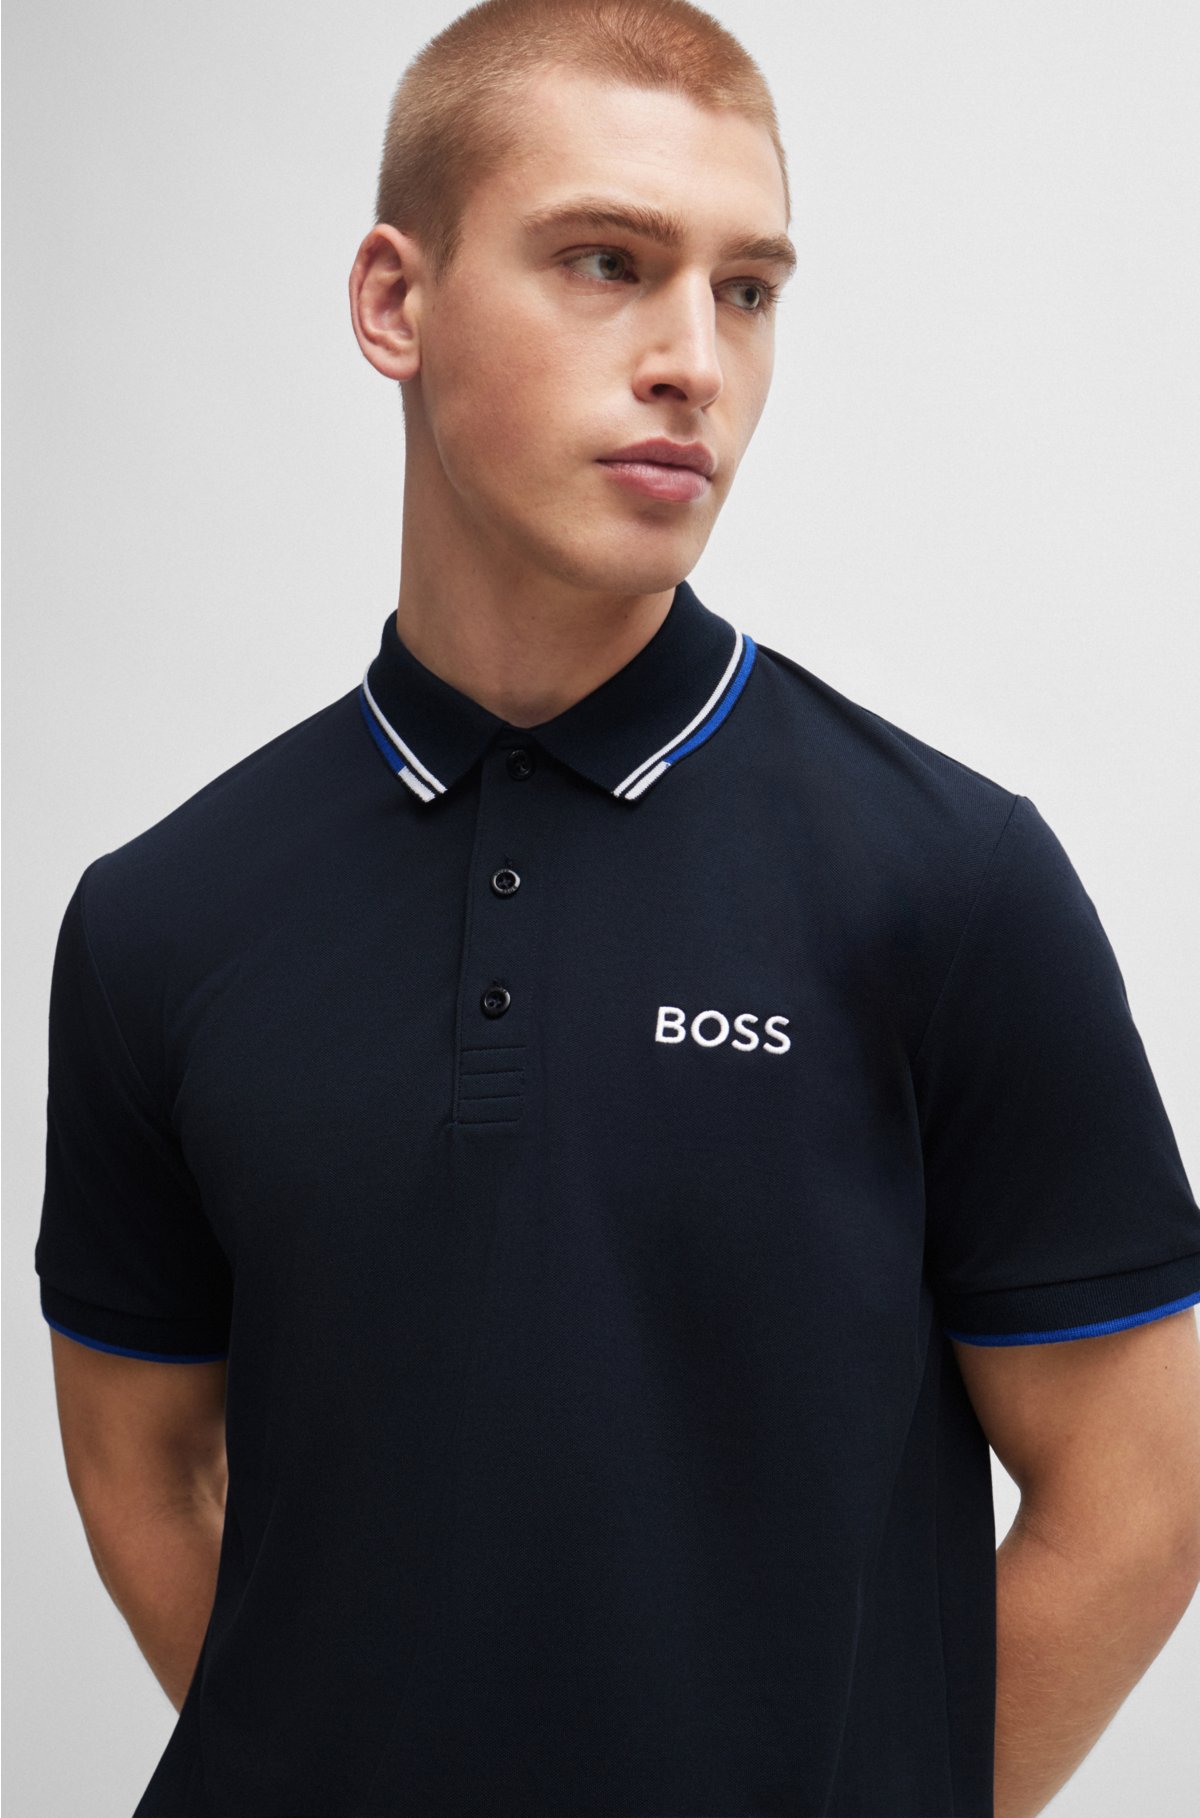 BOSS - with Polo logos shirt contrast